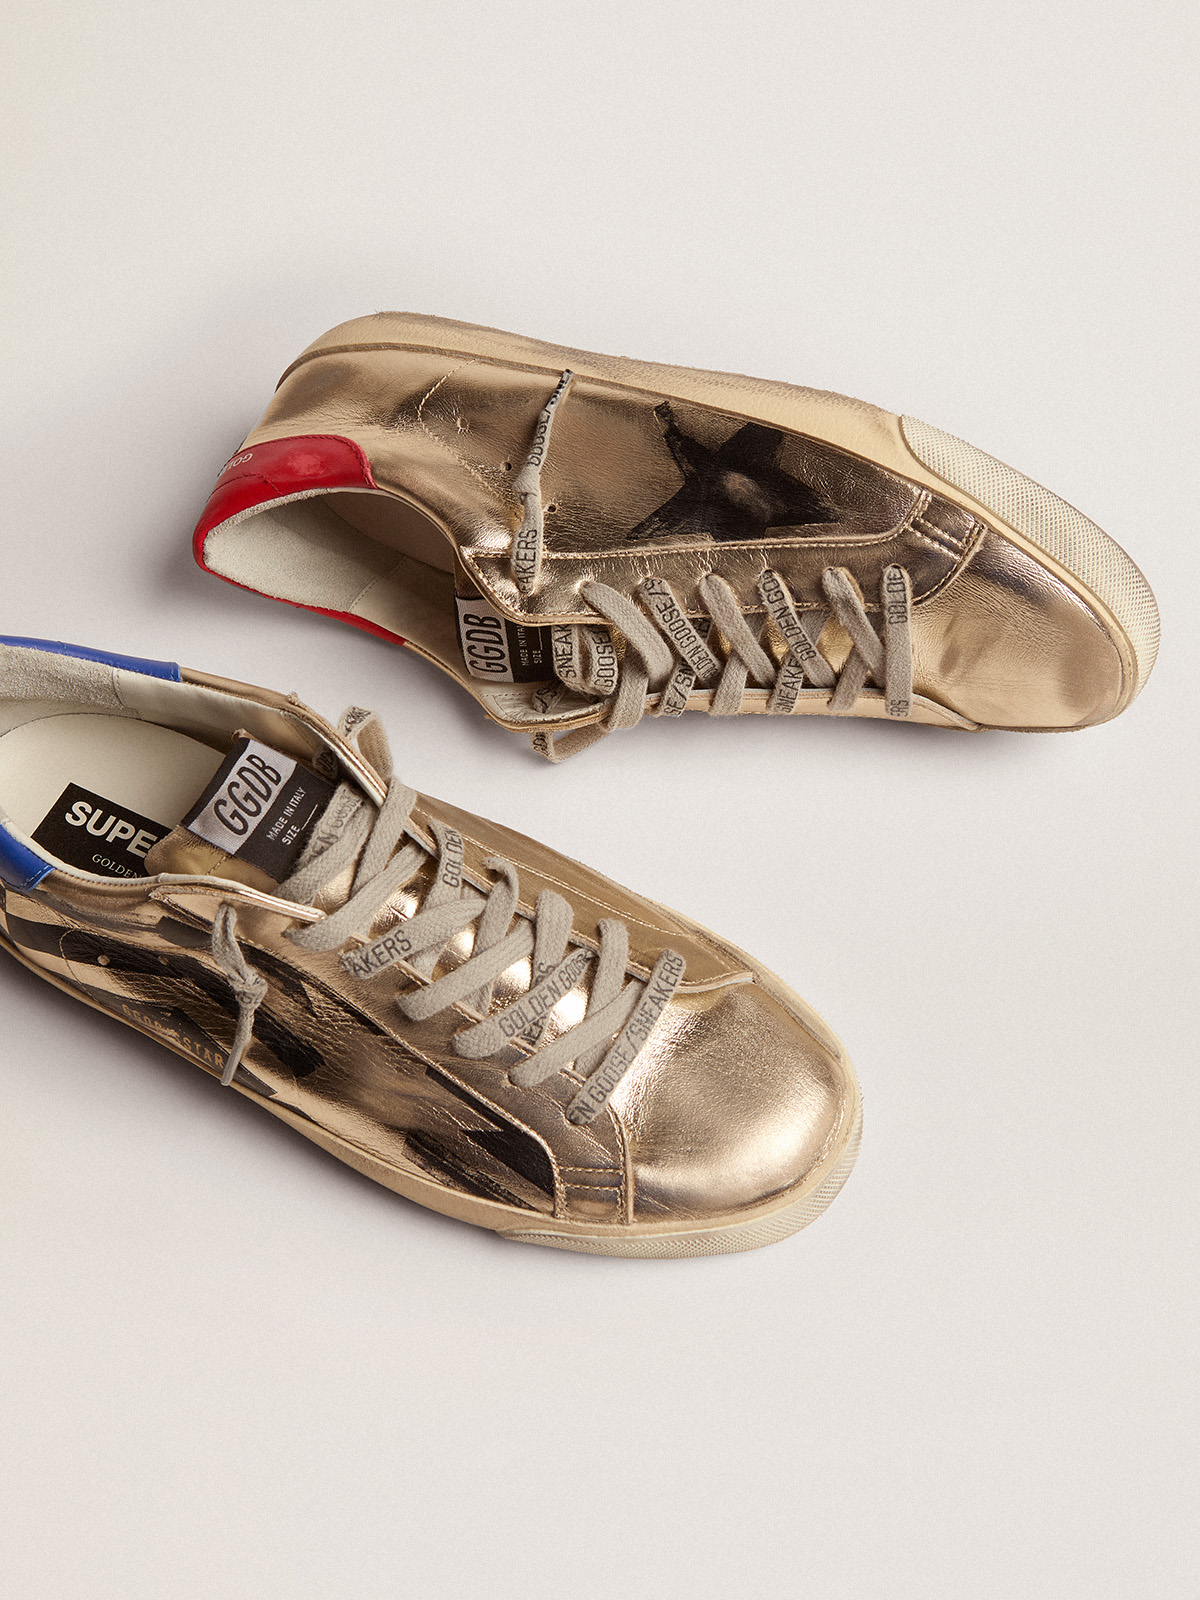 Super-Star sneakers in platinum-colored laminated leather with 